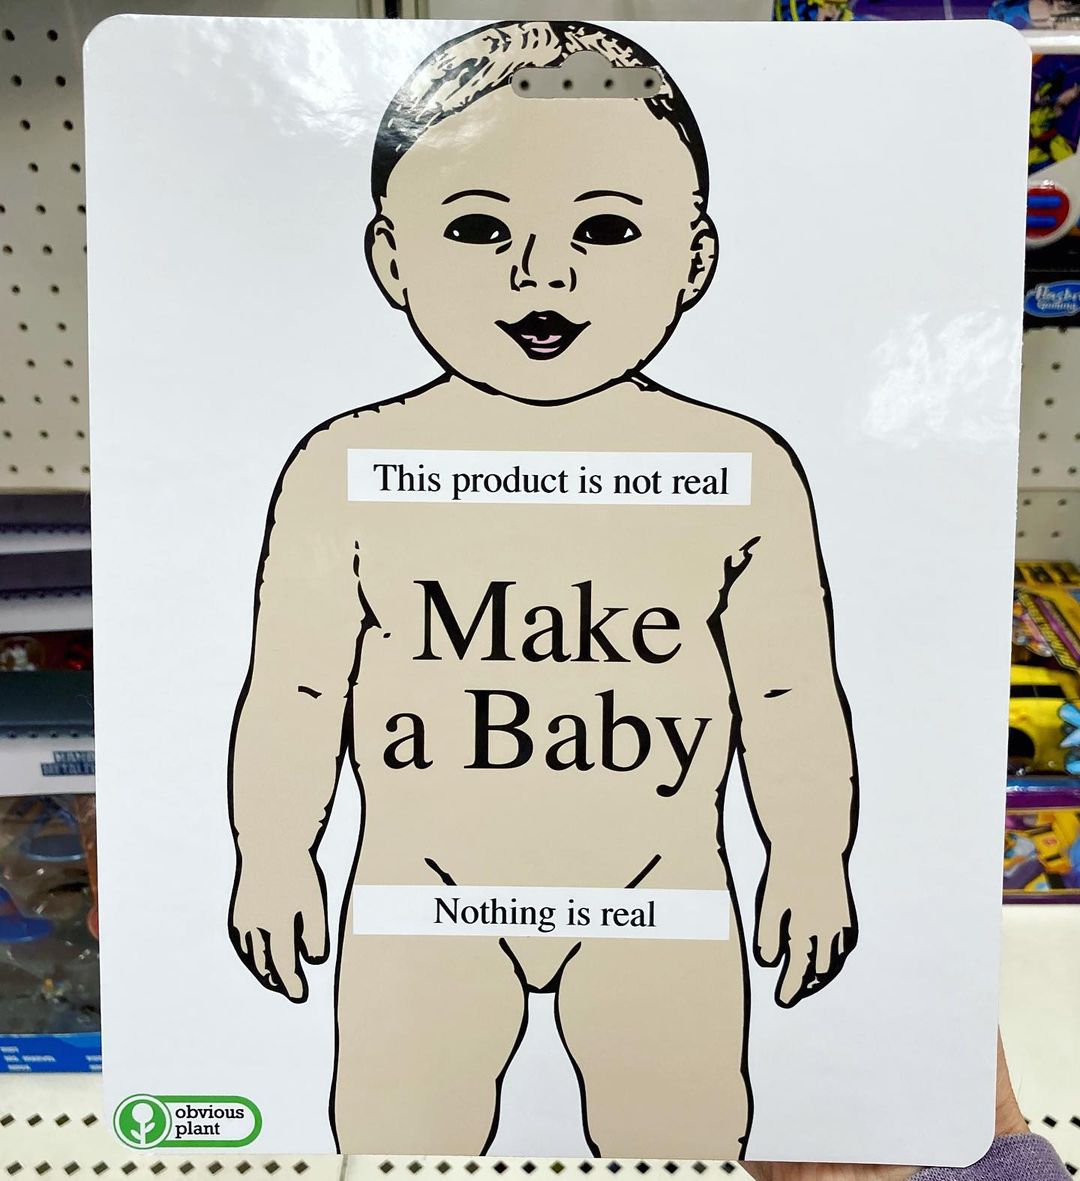 How To Make a Baby - Fake